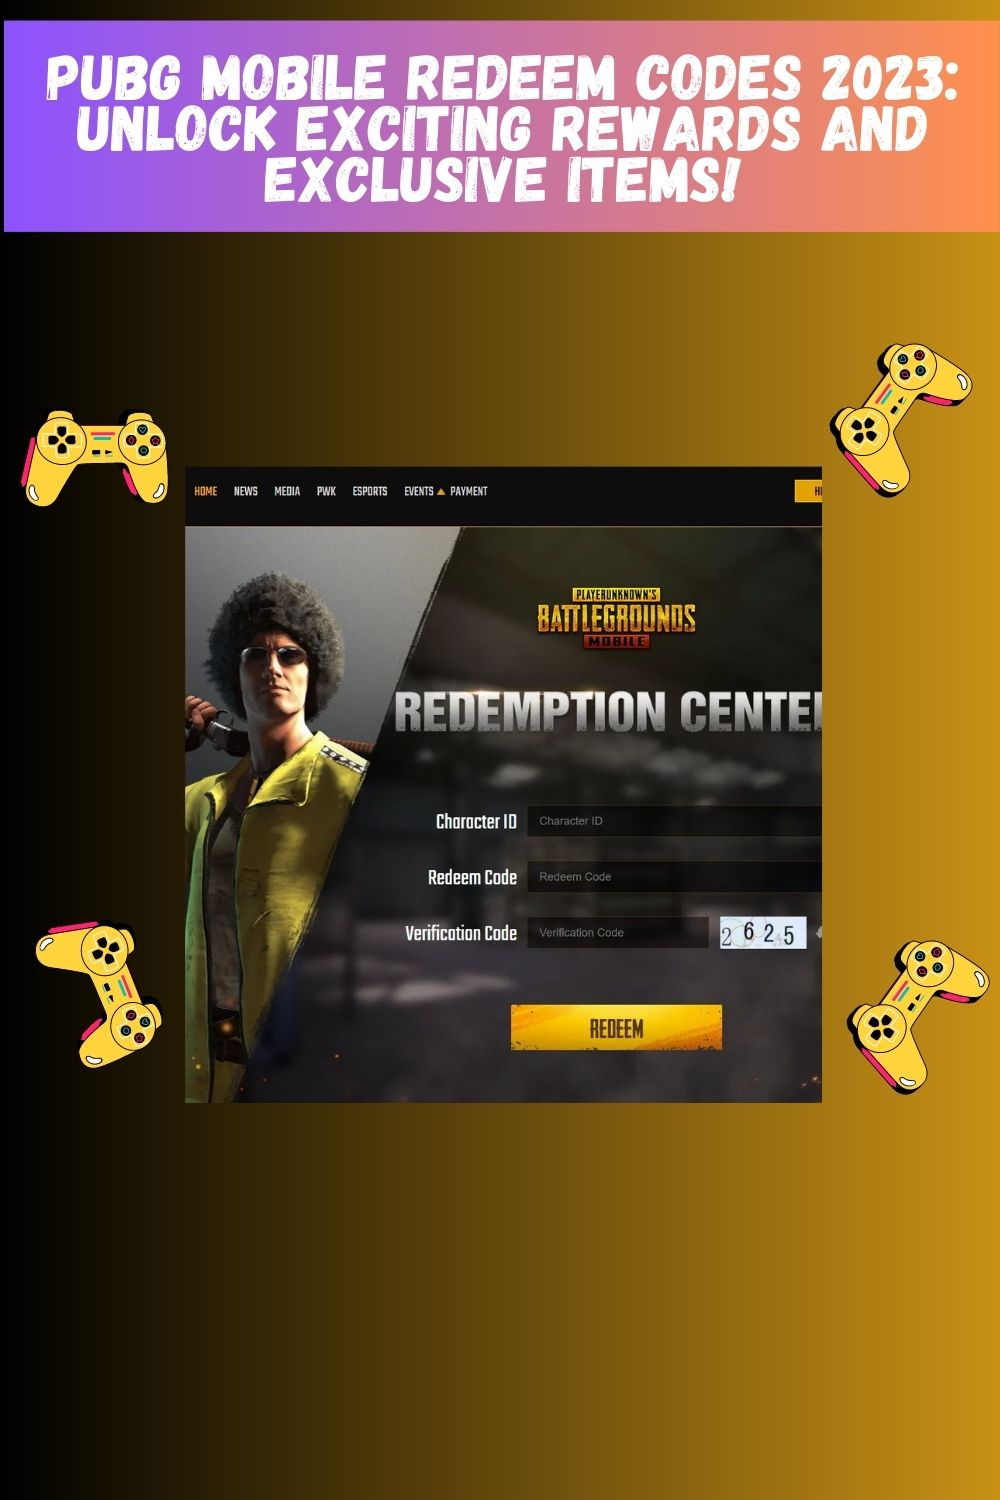 Pubg Mobile Redeem Codes 2023: Unlock Exciting Rewards and Exclusive Items!